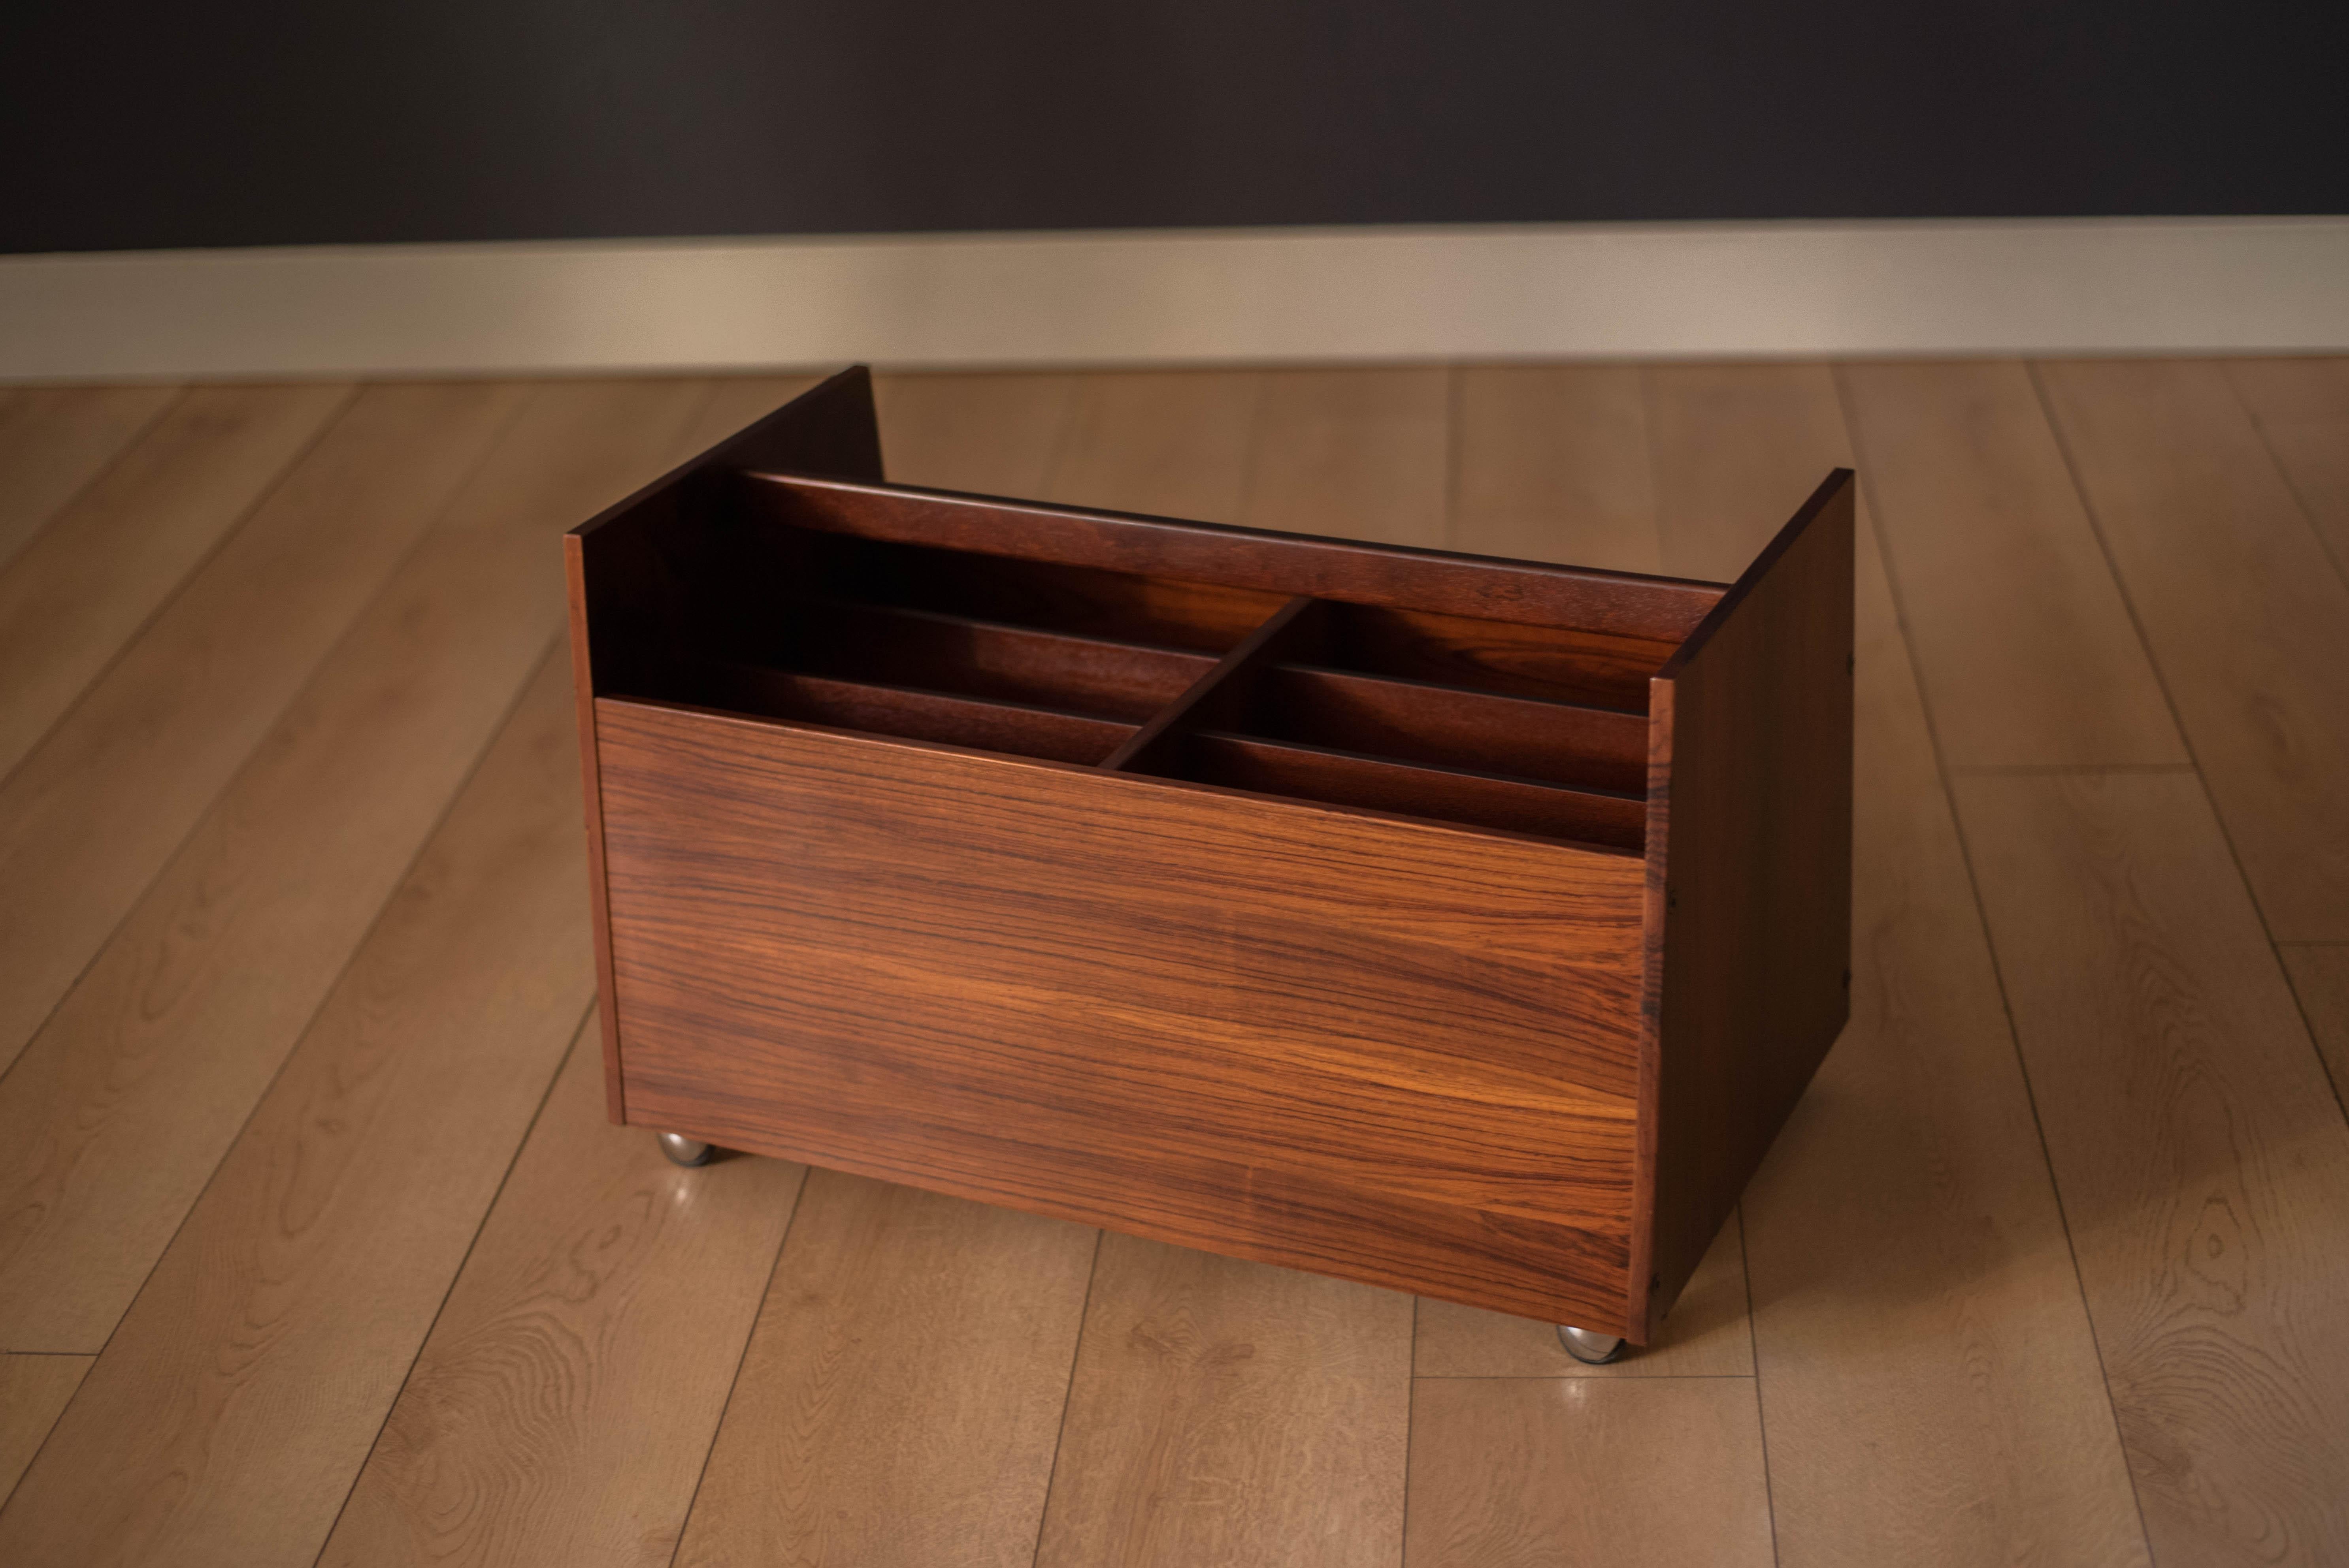 Mid century modern magazine LP vinyl record storage cart designed by Rolf Hesland for Bruksbo, Norway. This piece features stunning Brazilian rosewood grains that showcase from any angle. Equipped with six organizing compartments and four casters